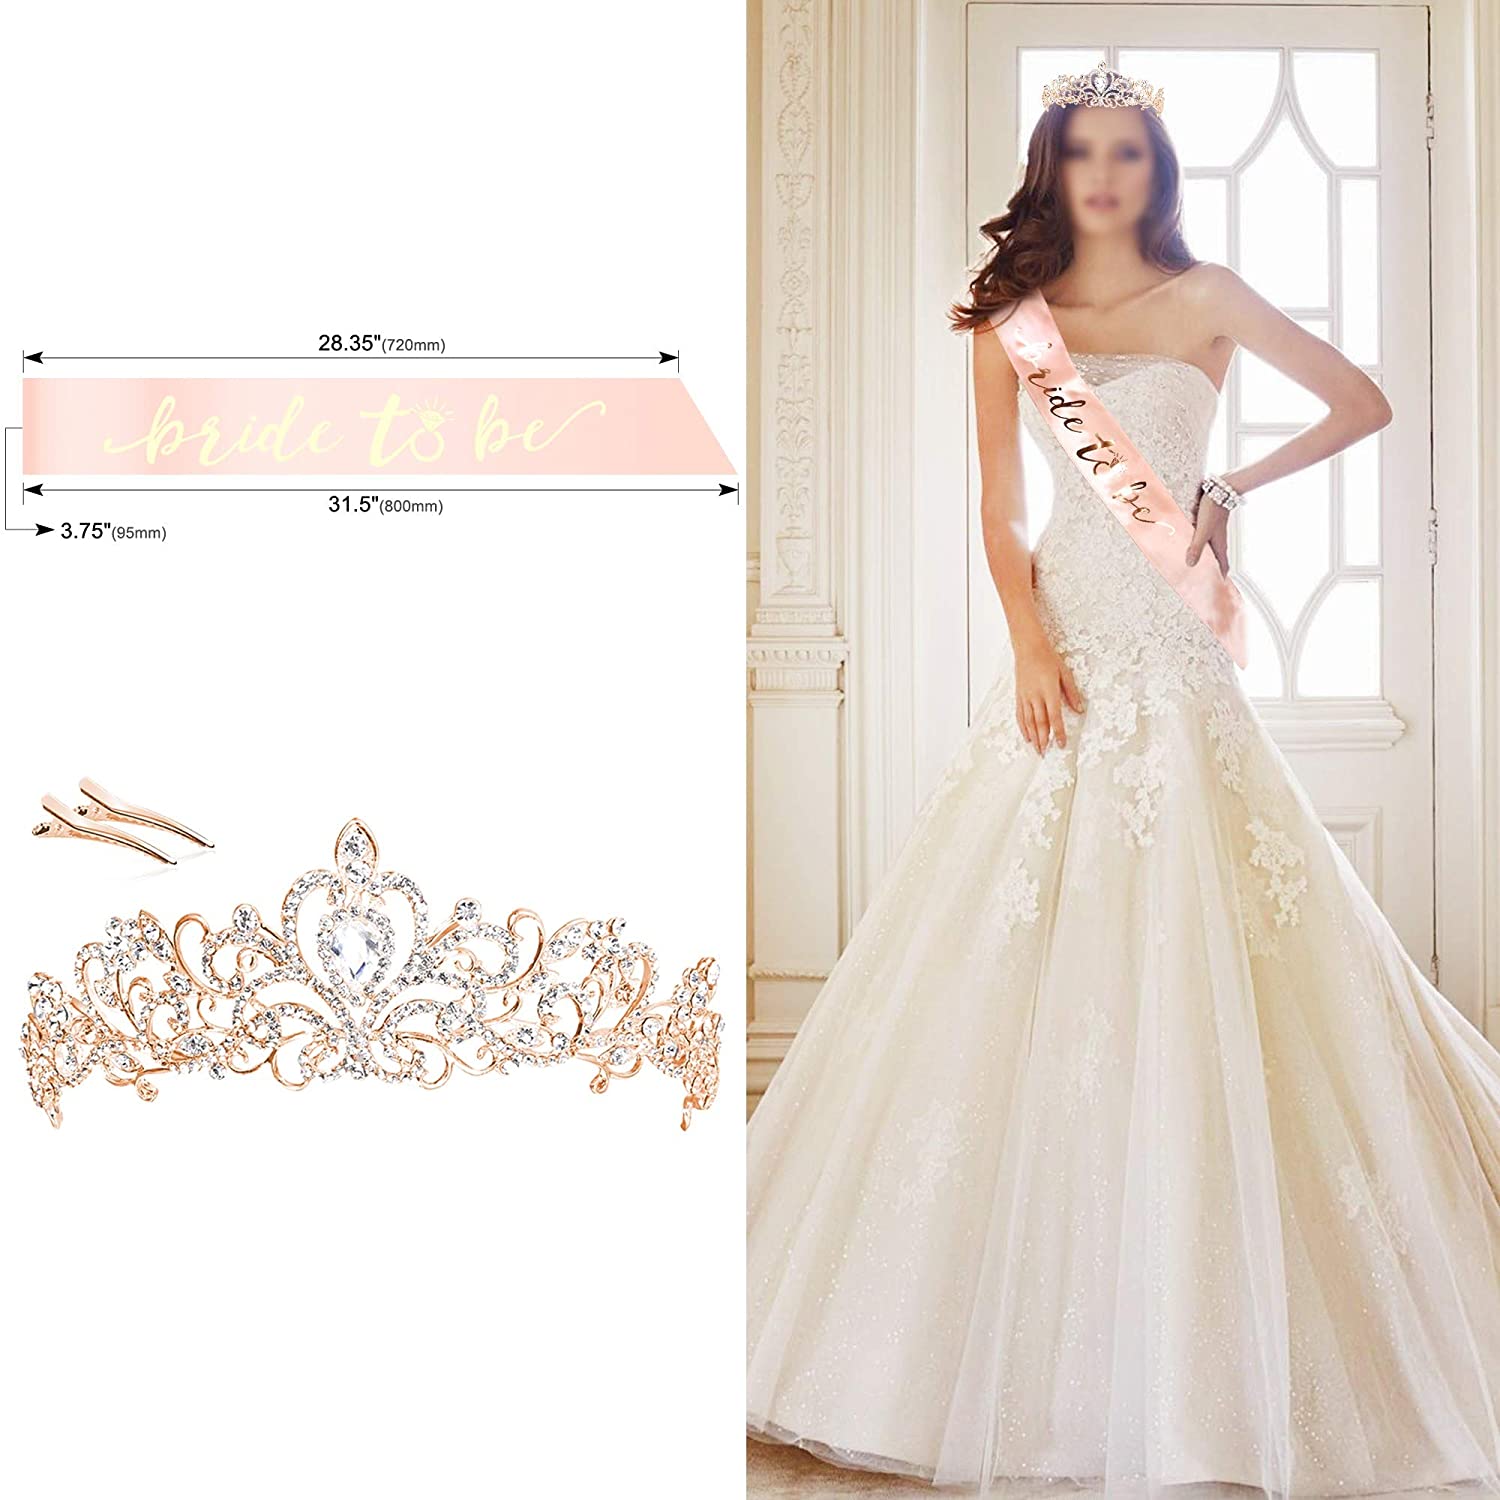 Veil Comb White With Gold Bride to Be Hen Night Wedding Party Accessories Tulle 